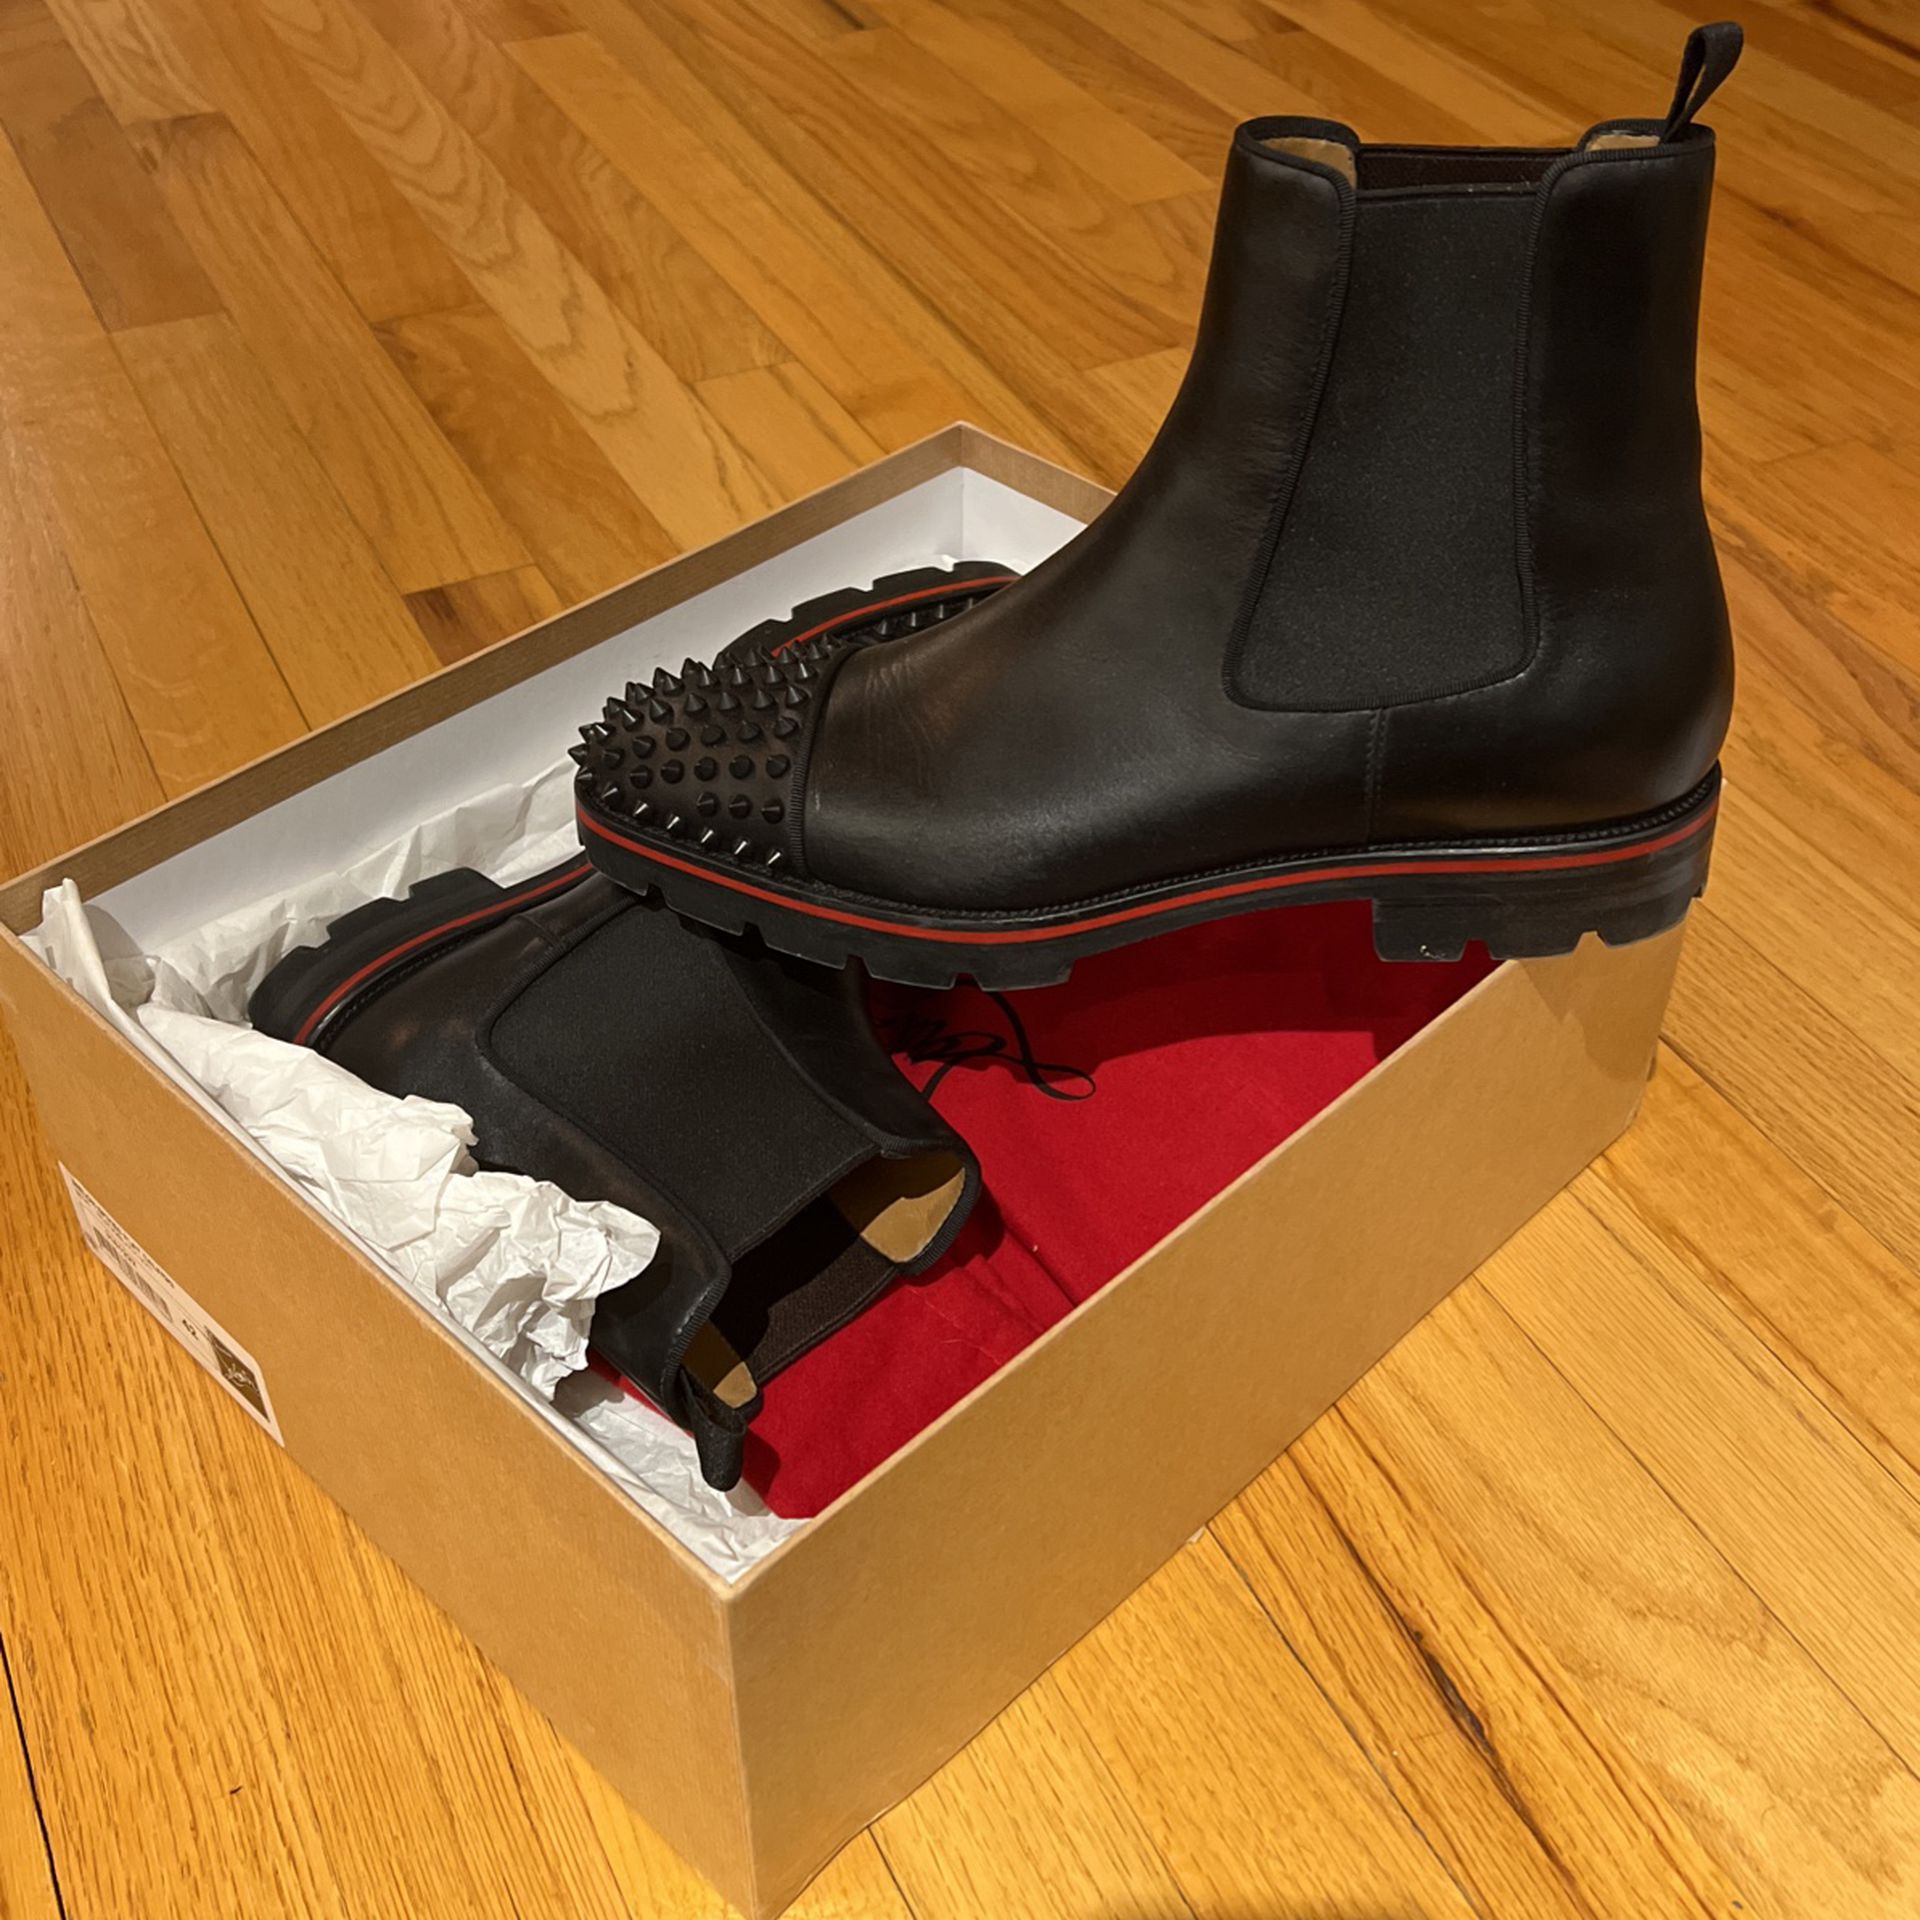 Christian Louboutin Moscou Zip Red Sole Combat Boots, Brand Size 45 ( US  Size 12 ) 320128 1BK01 - Shoes, Moscou - Jomashop